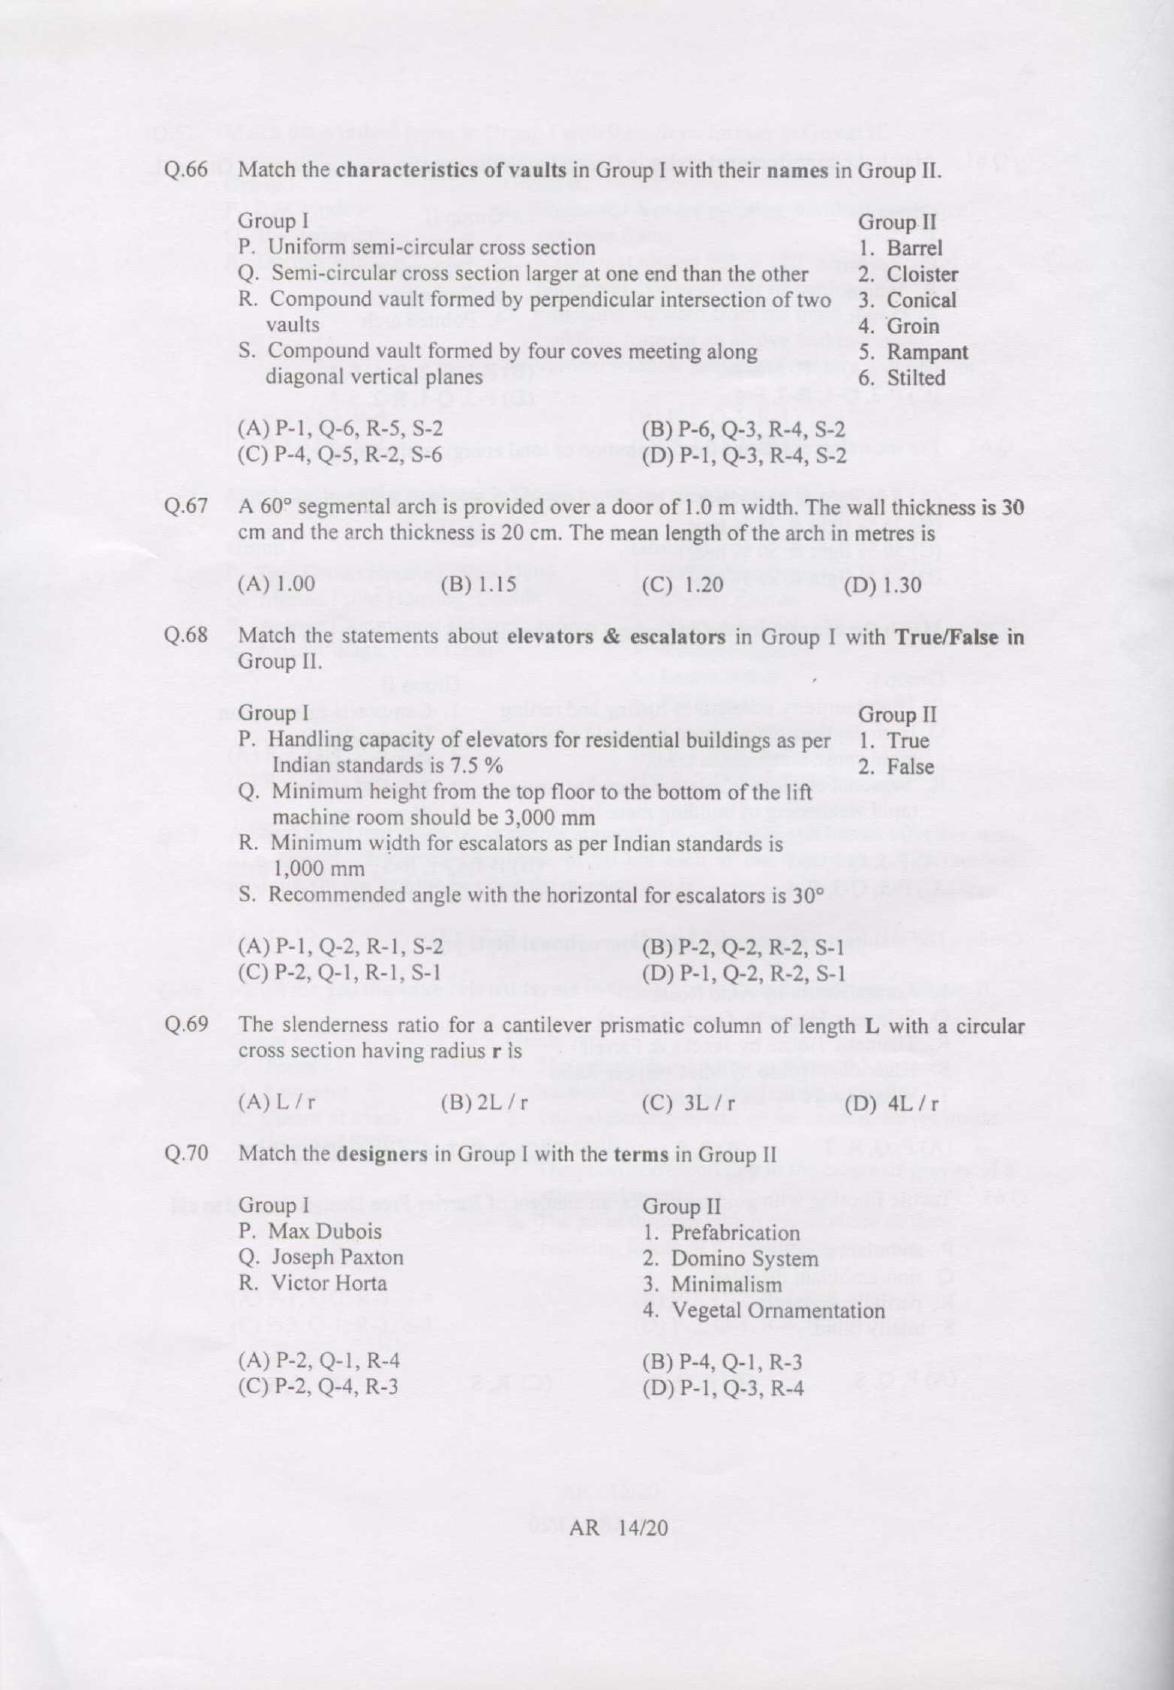 GATE 2007 Architecture and Planning (AR) Question Paper with Answer Key - Page 14